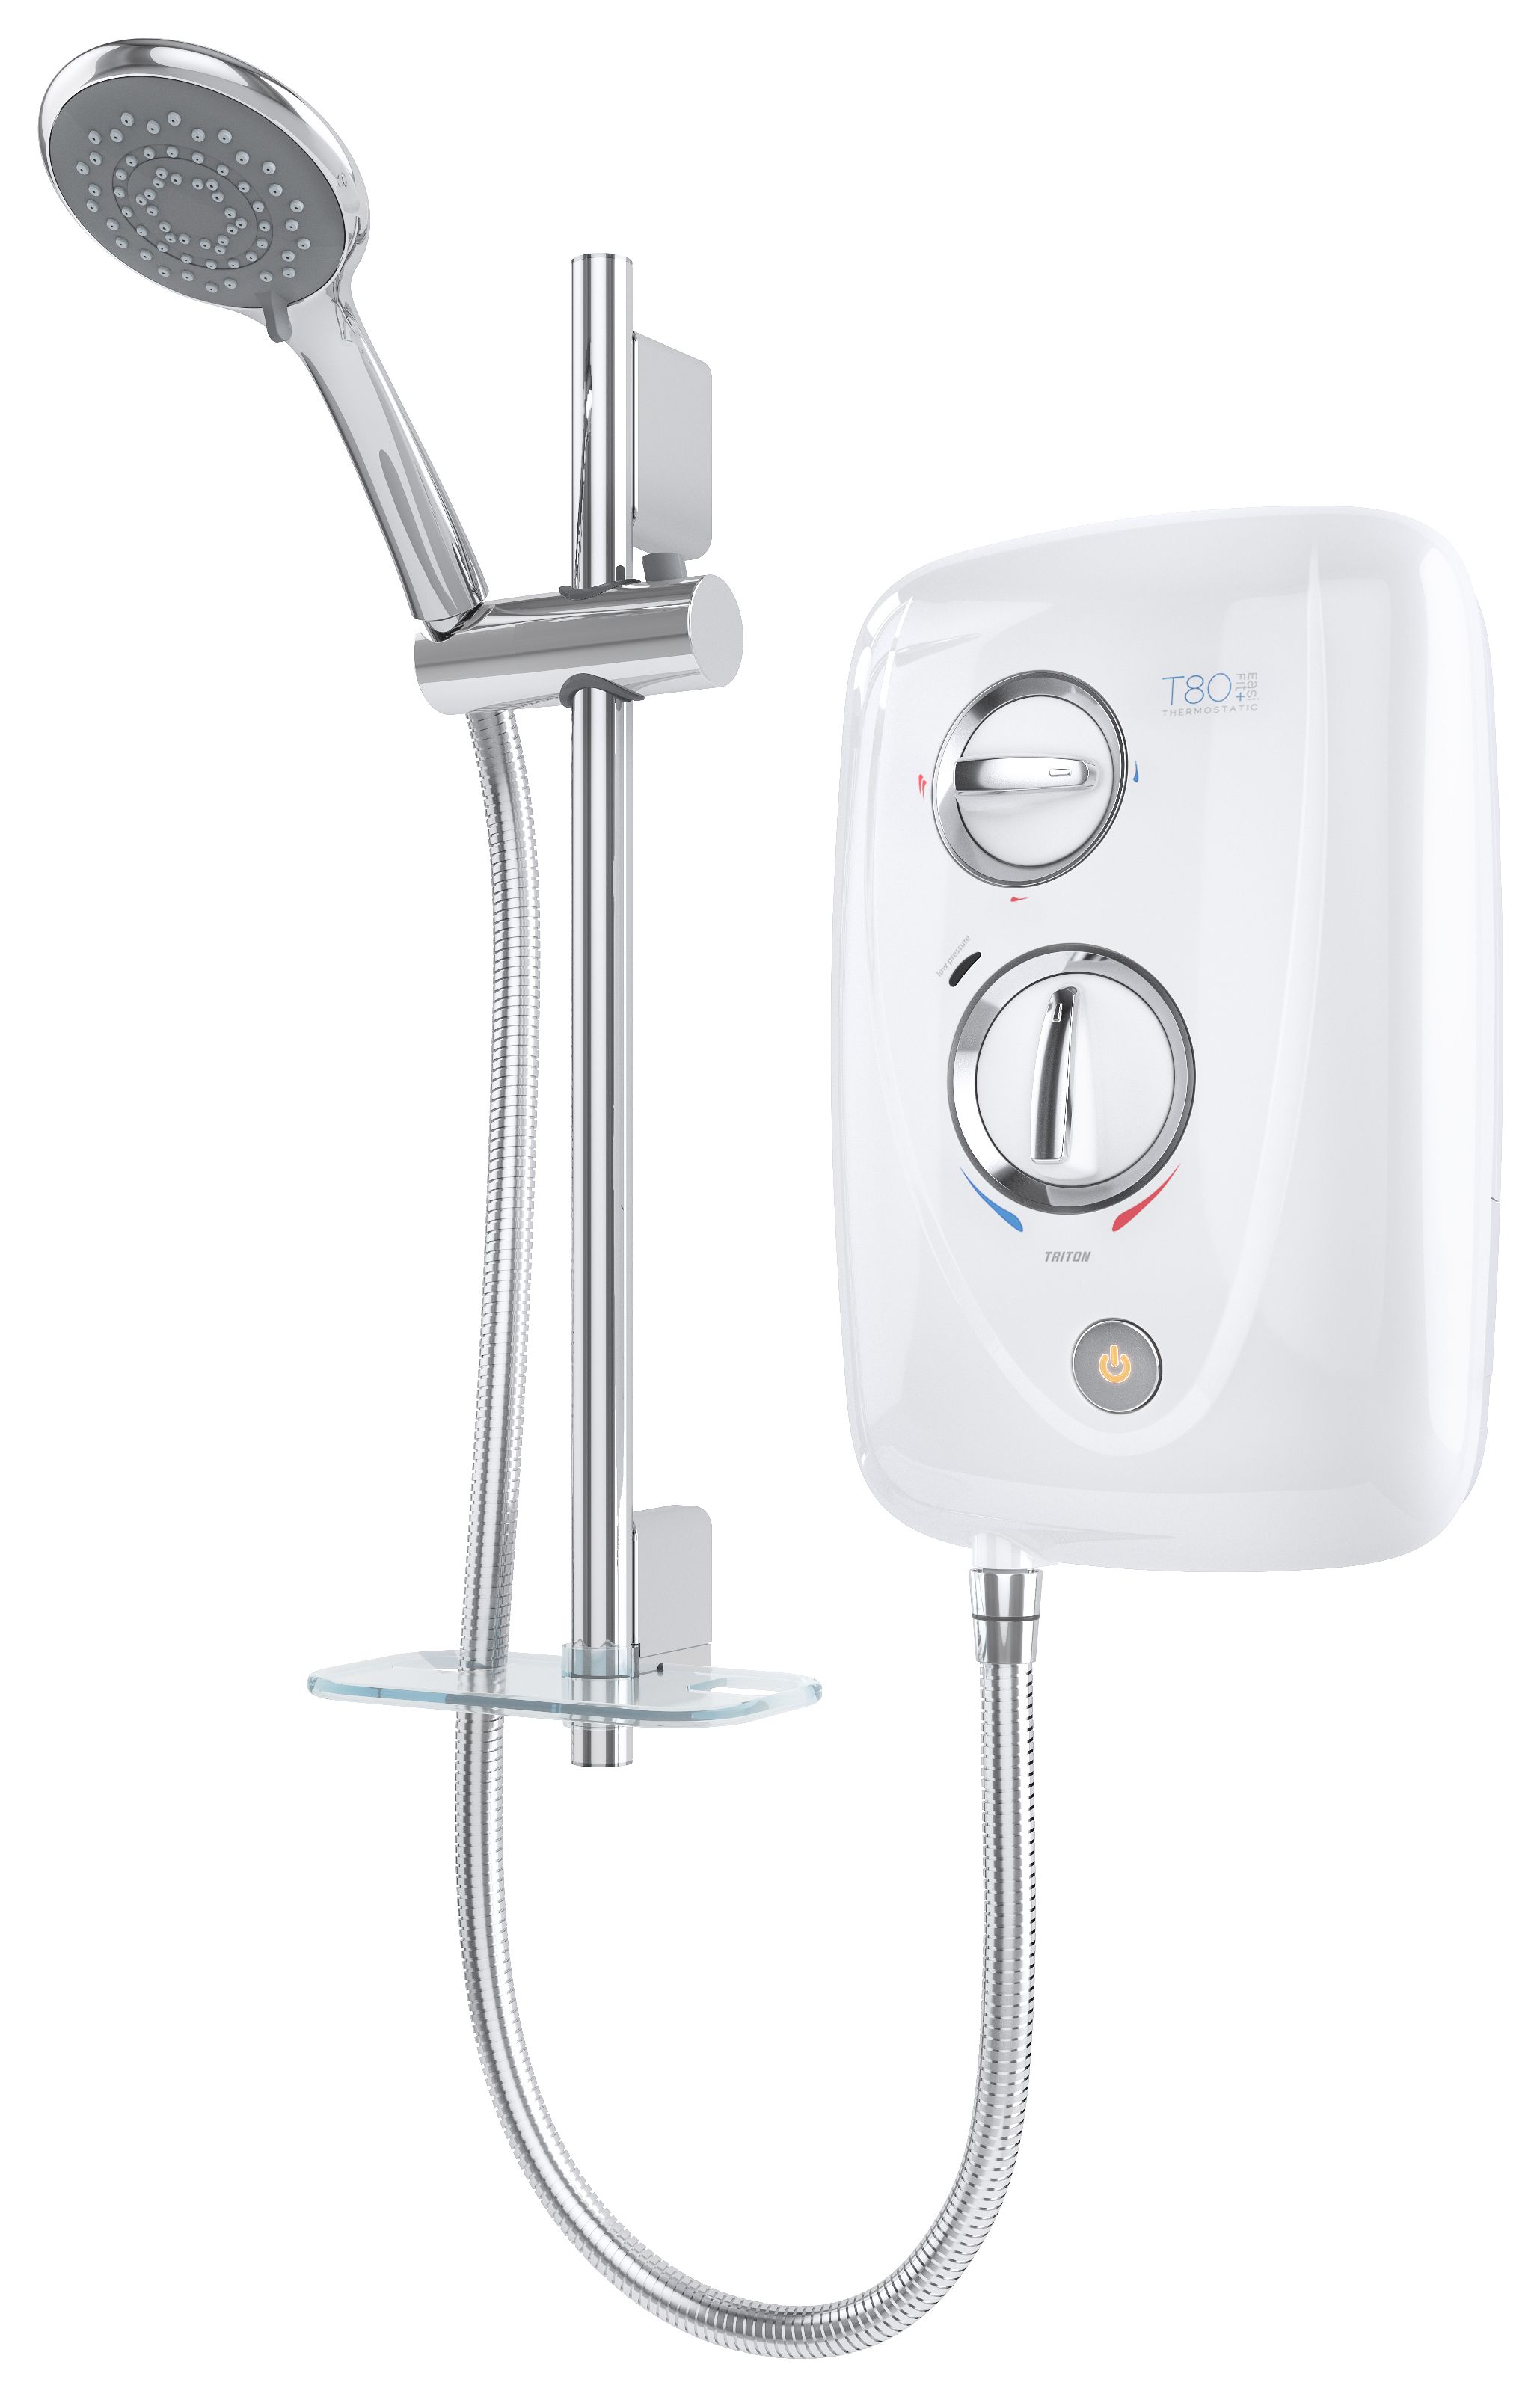 Image of Triton T80 Easi-fit+ Thermo 8.5kW Electric Shower